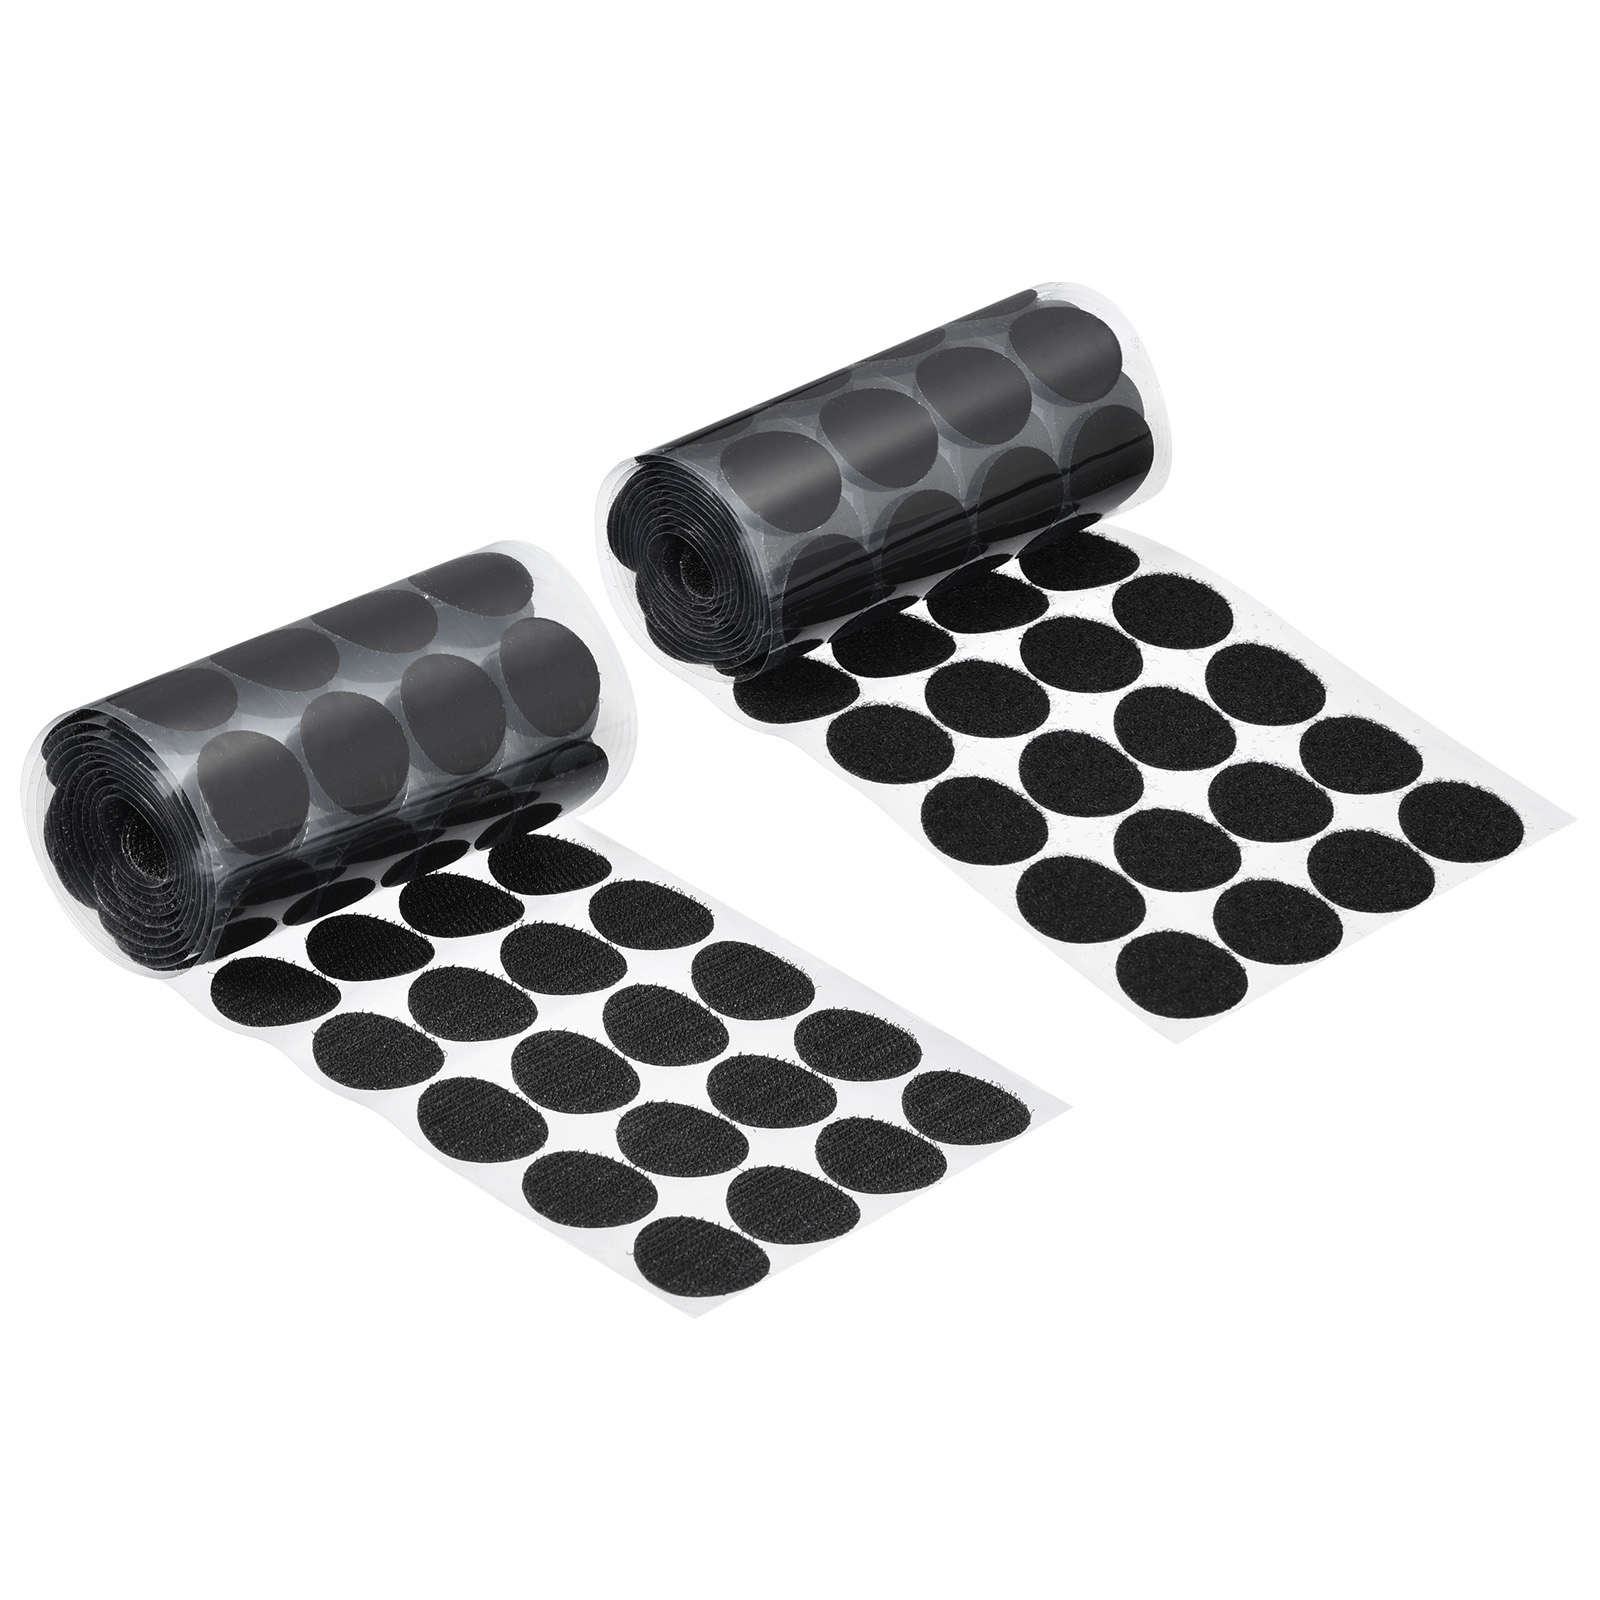 Self Adhesive Dots, 80 Pairs 0.98 - Blending Fabric Hook & Loop Tapes,  Round Dots for Classroom (Black)